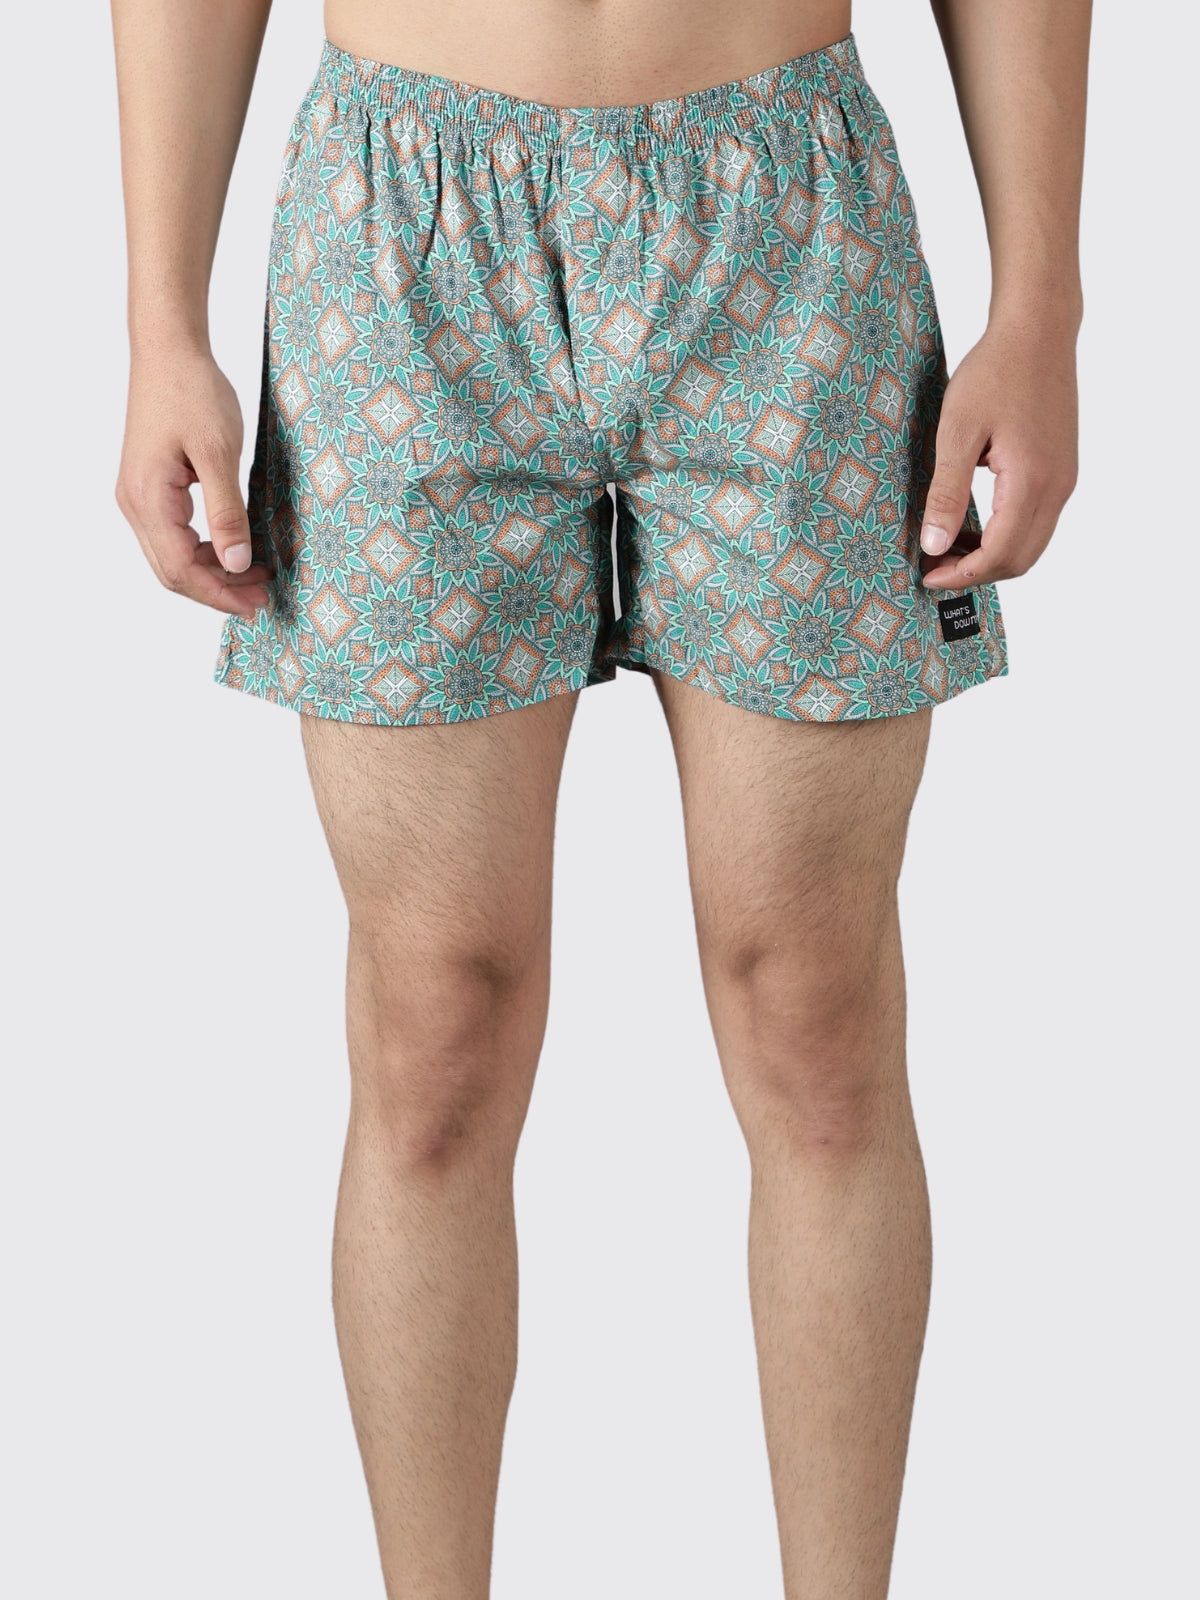 Green Dynasty Mens Boxers